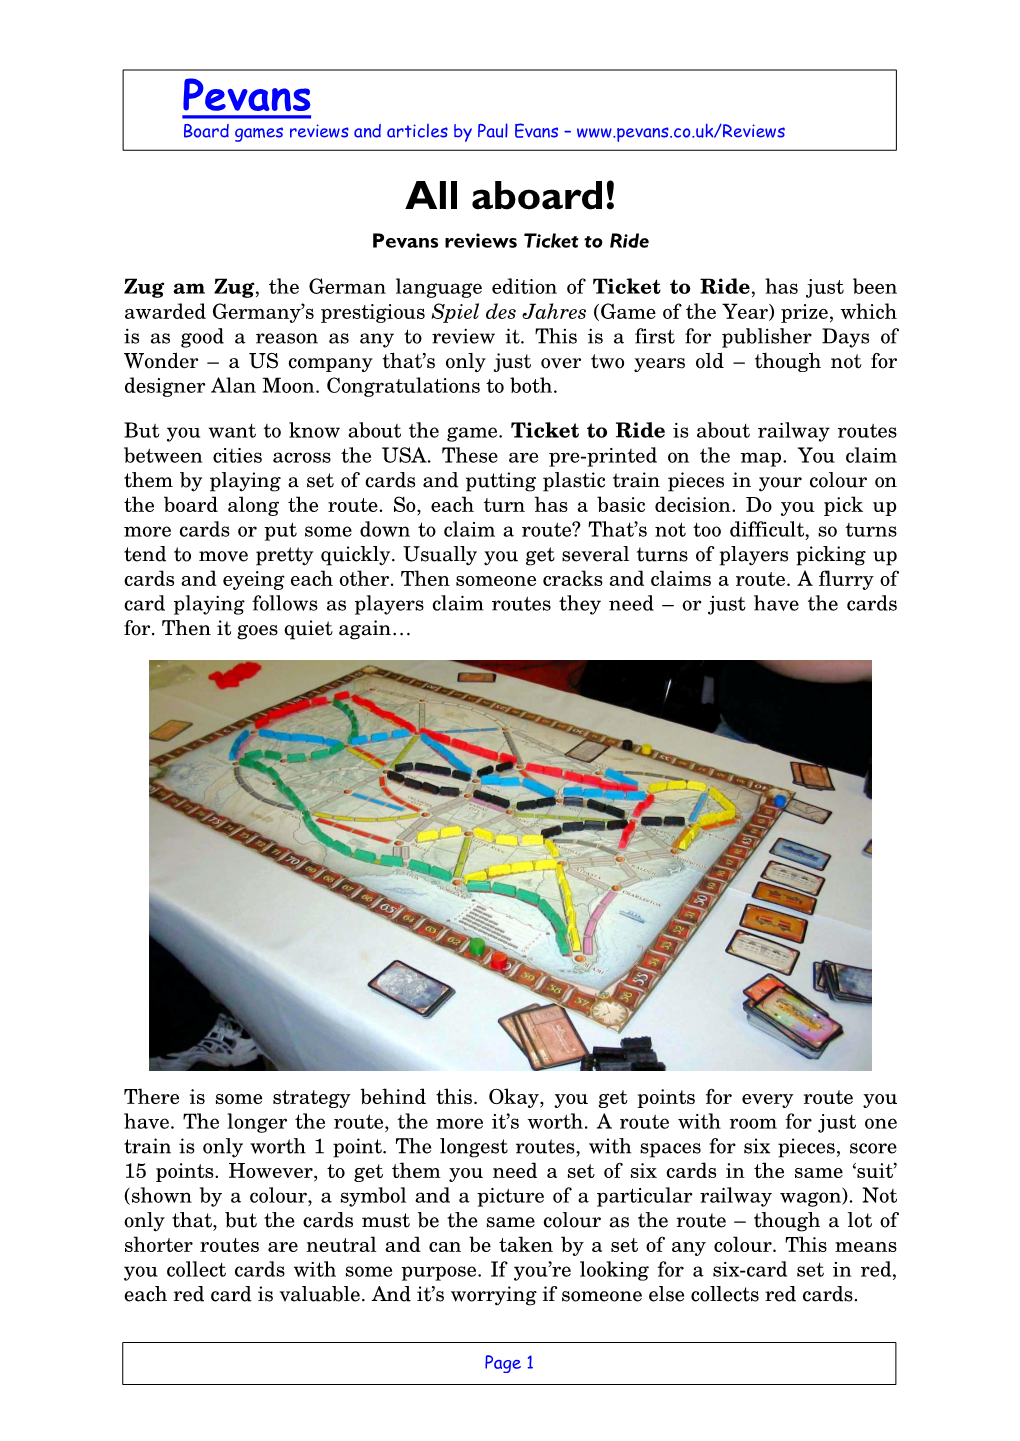 All Aboard! Pevans Reviews Ticket to Ride